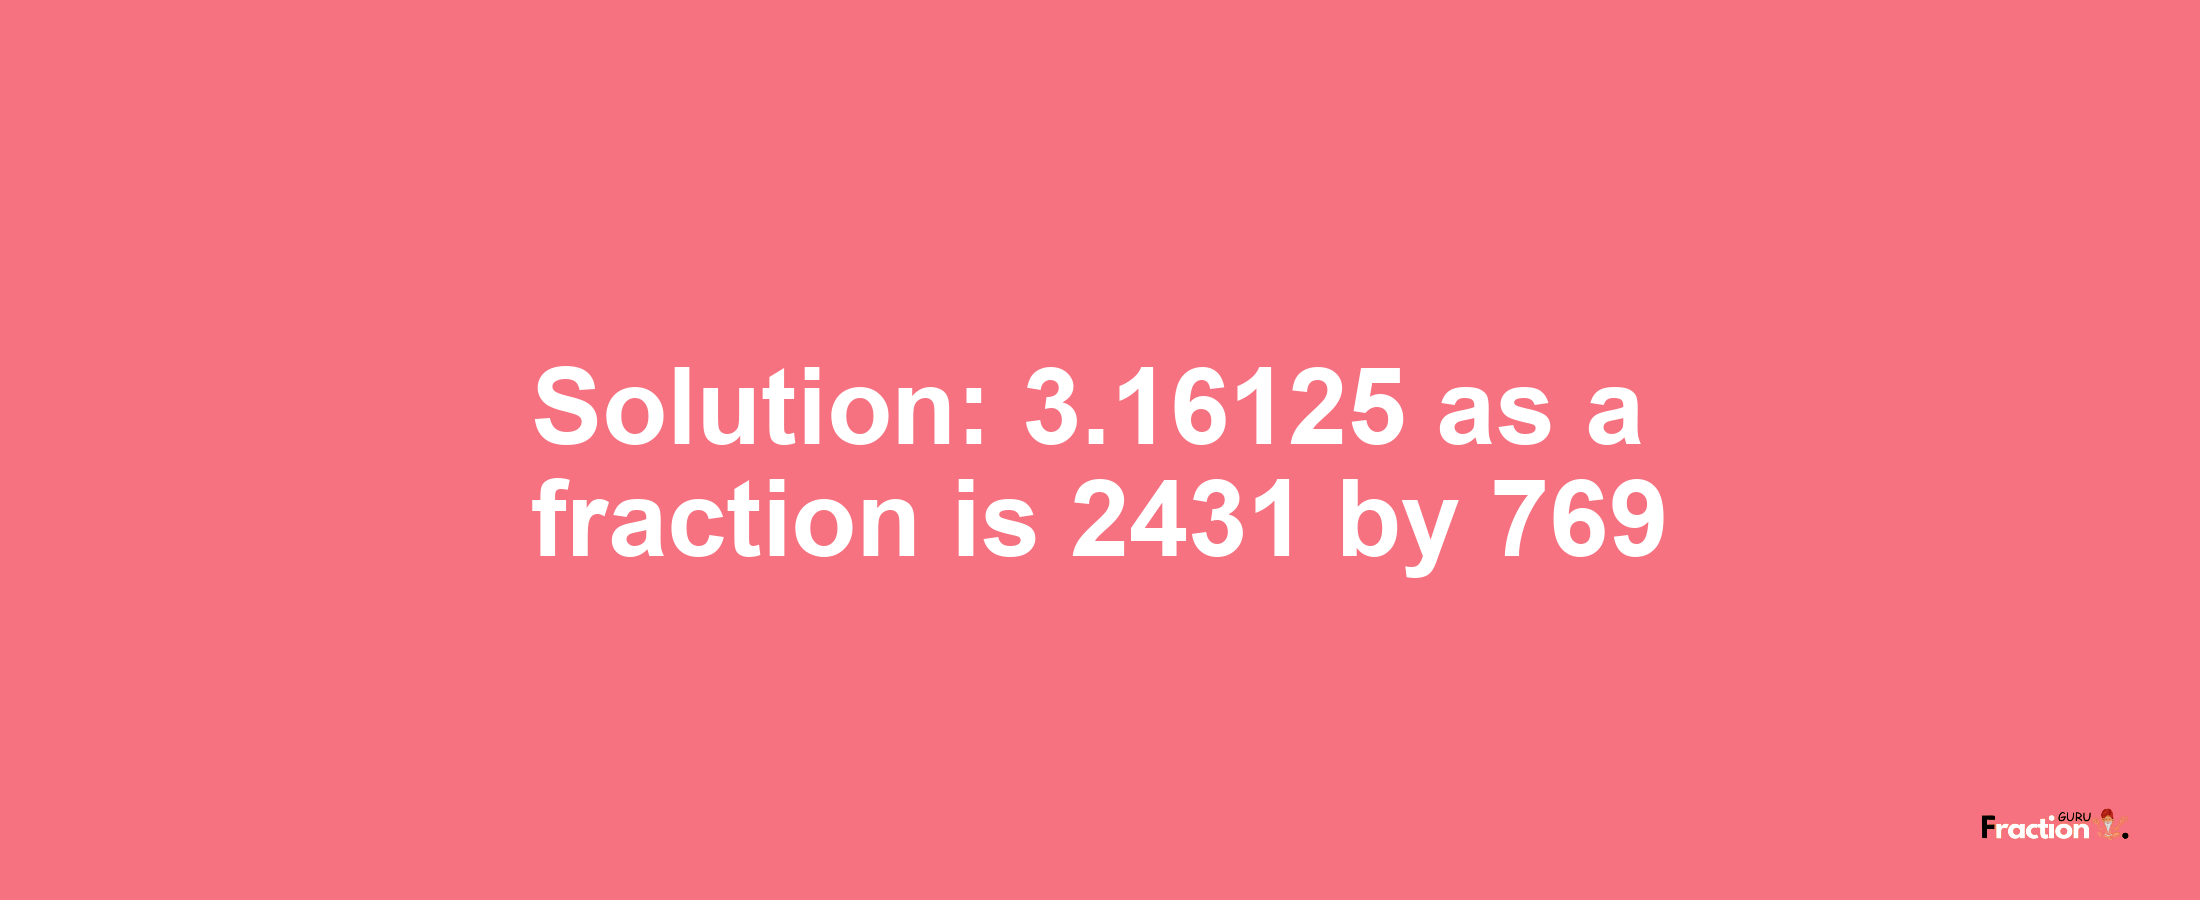 Solution:3.16125 as a fraction is 2431/769